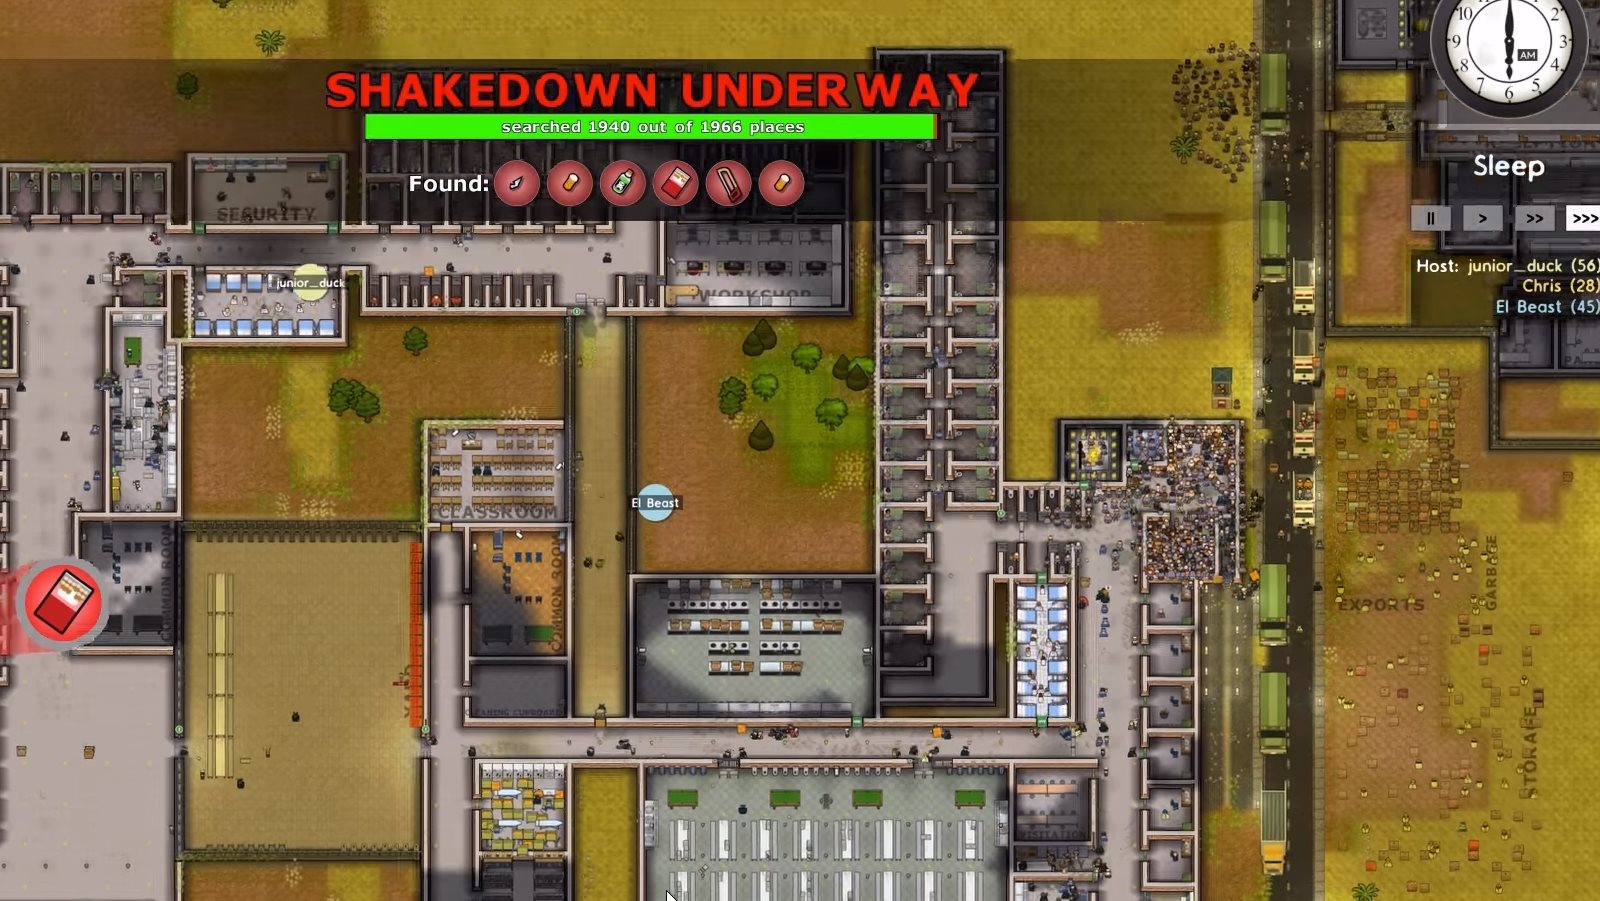 download prison architect free for free